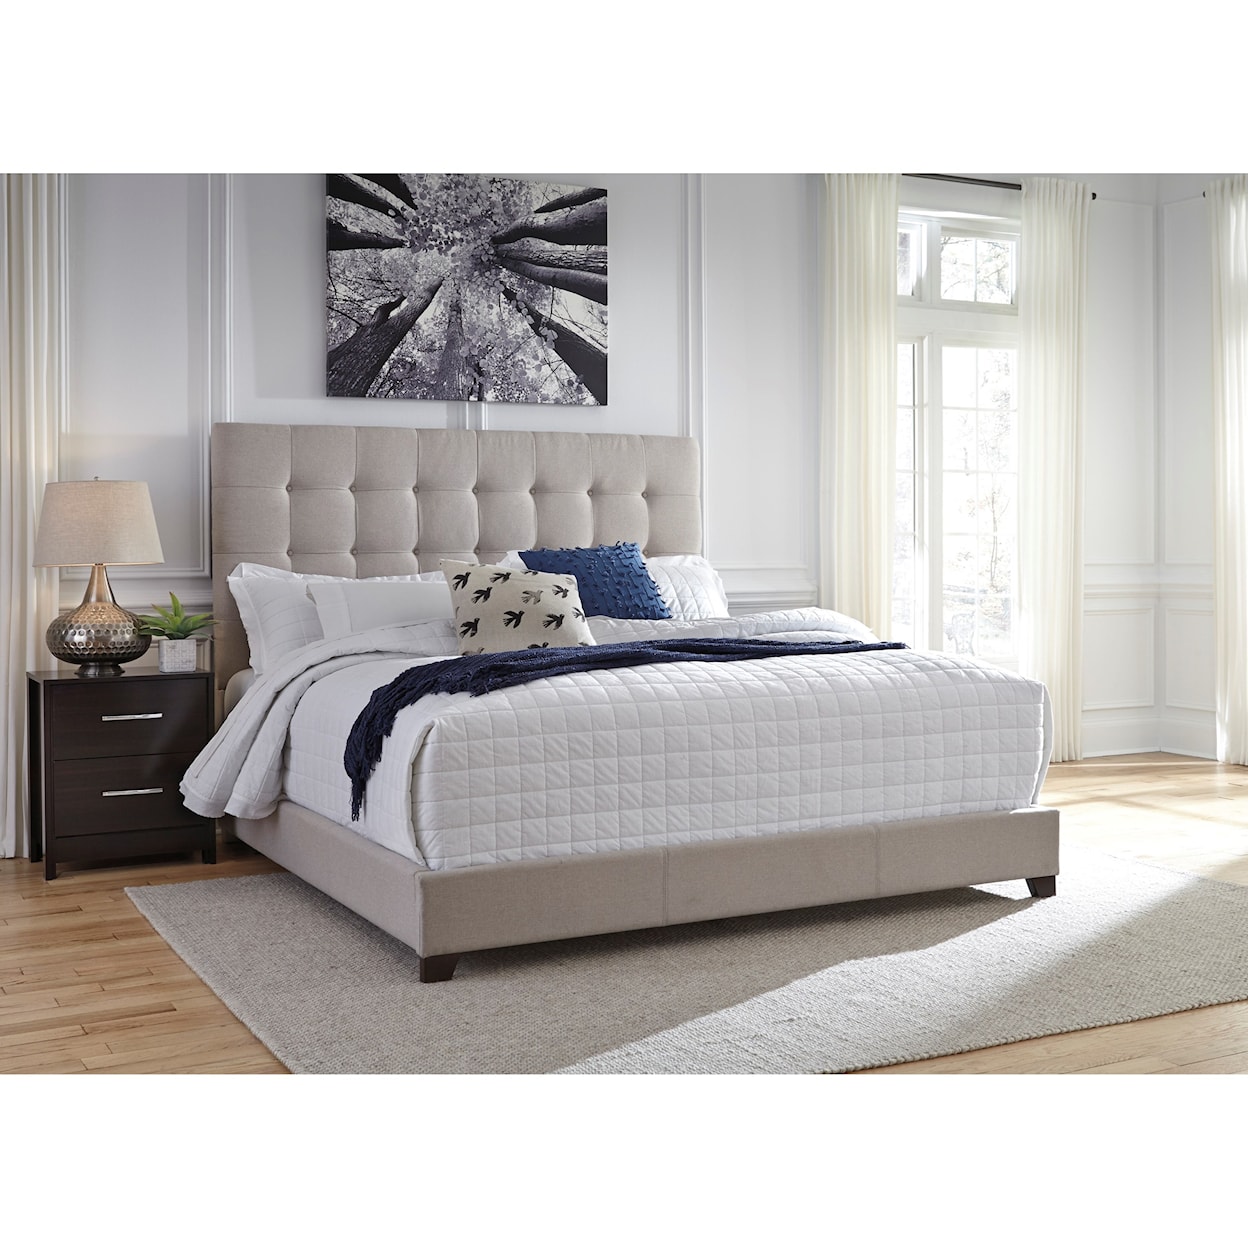 Signature Design by Ashley Dolante King Bed